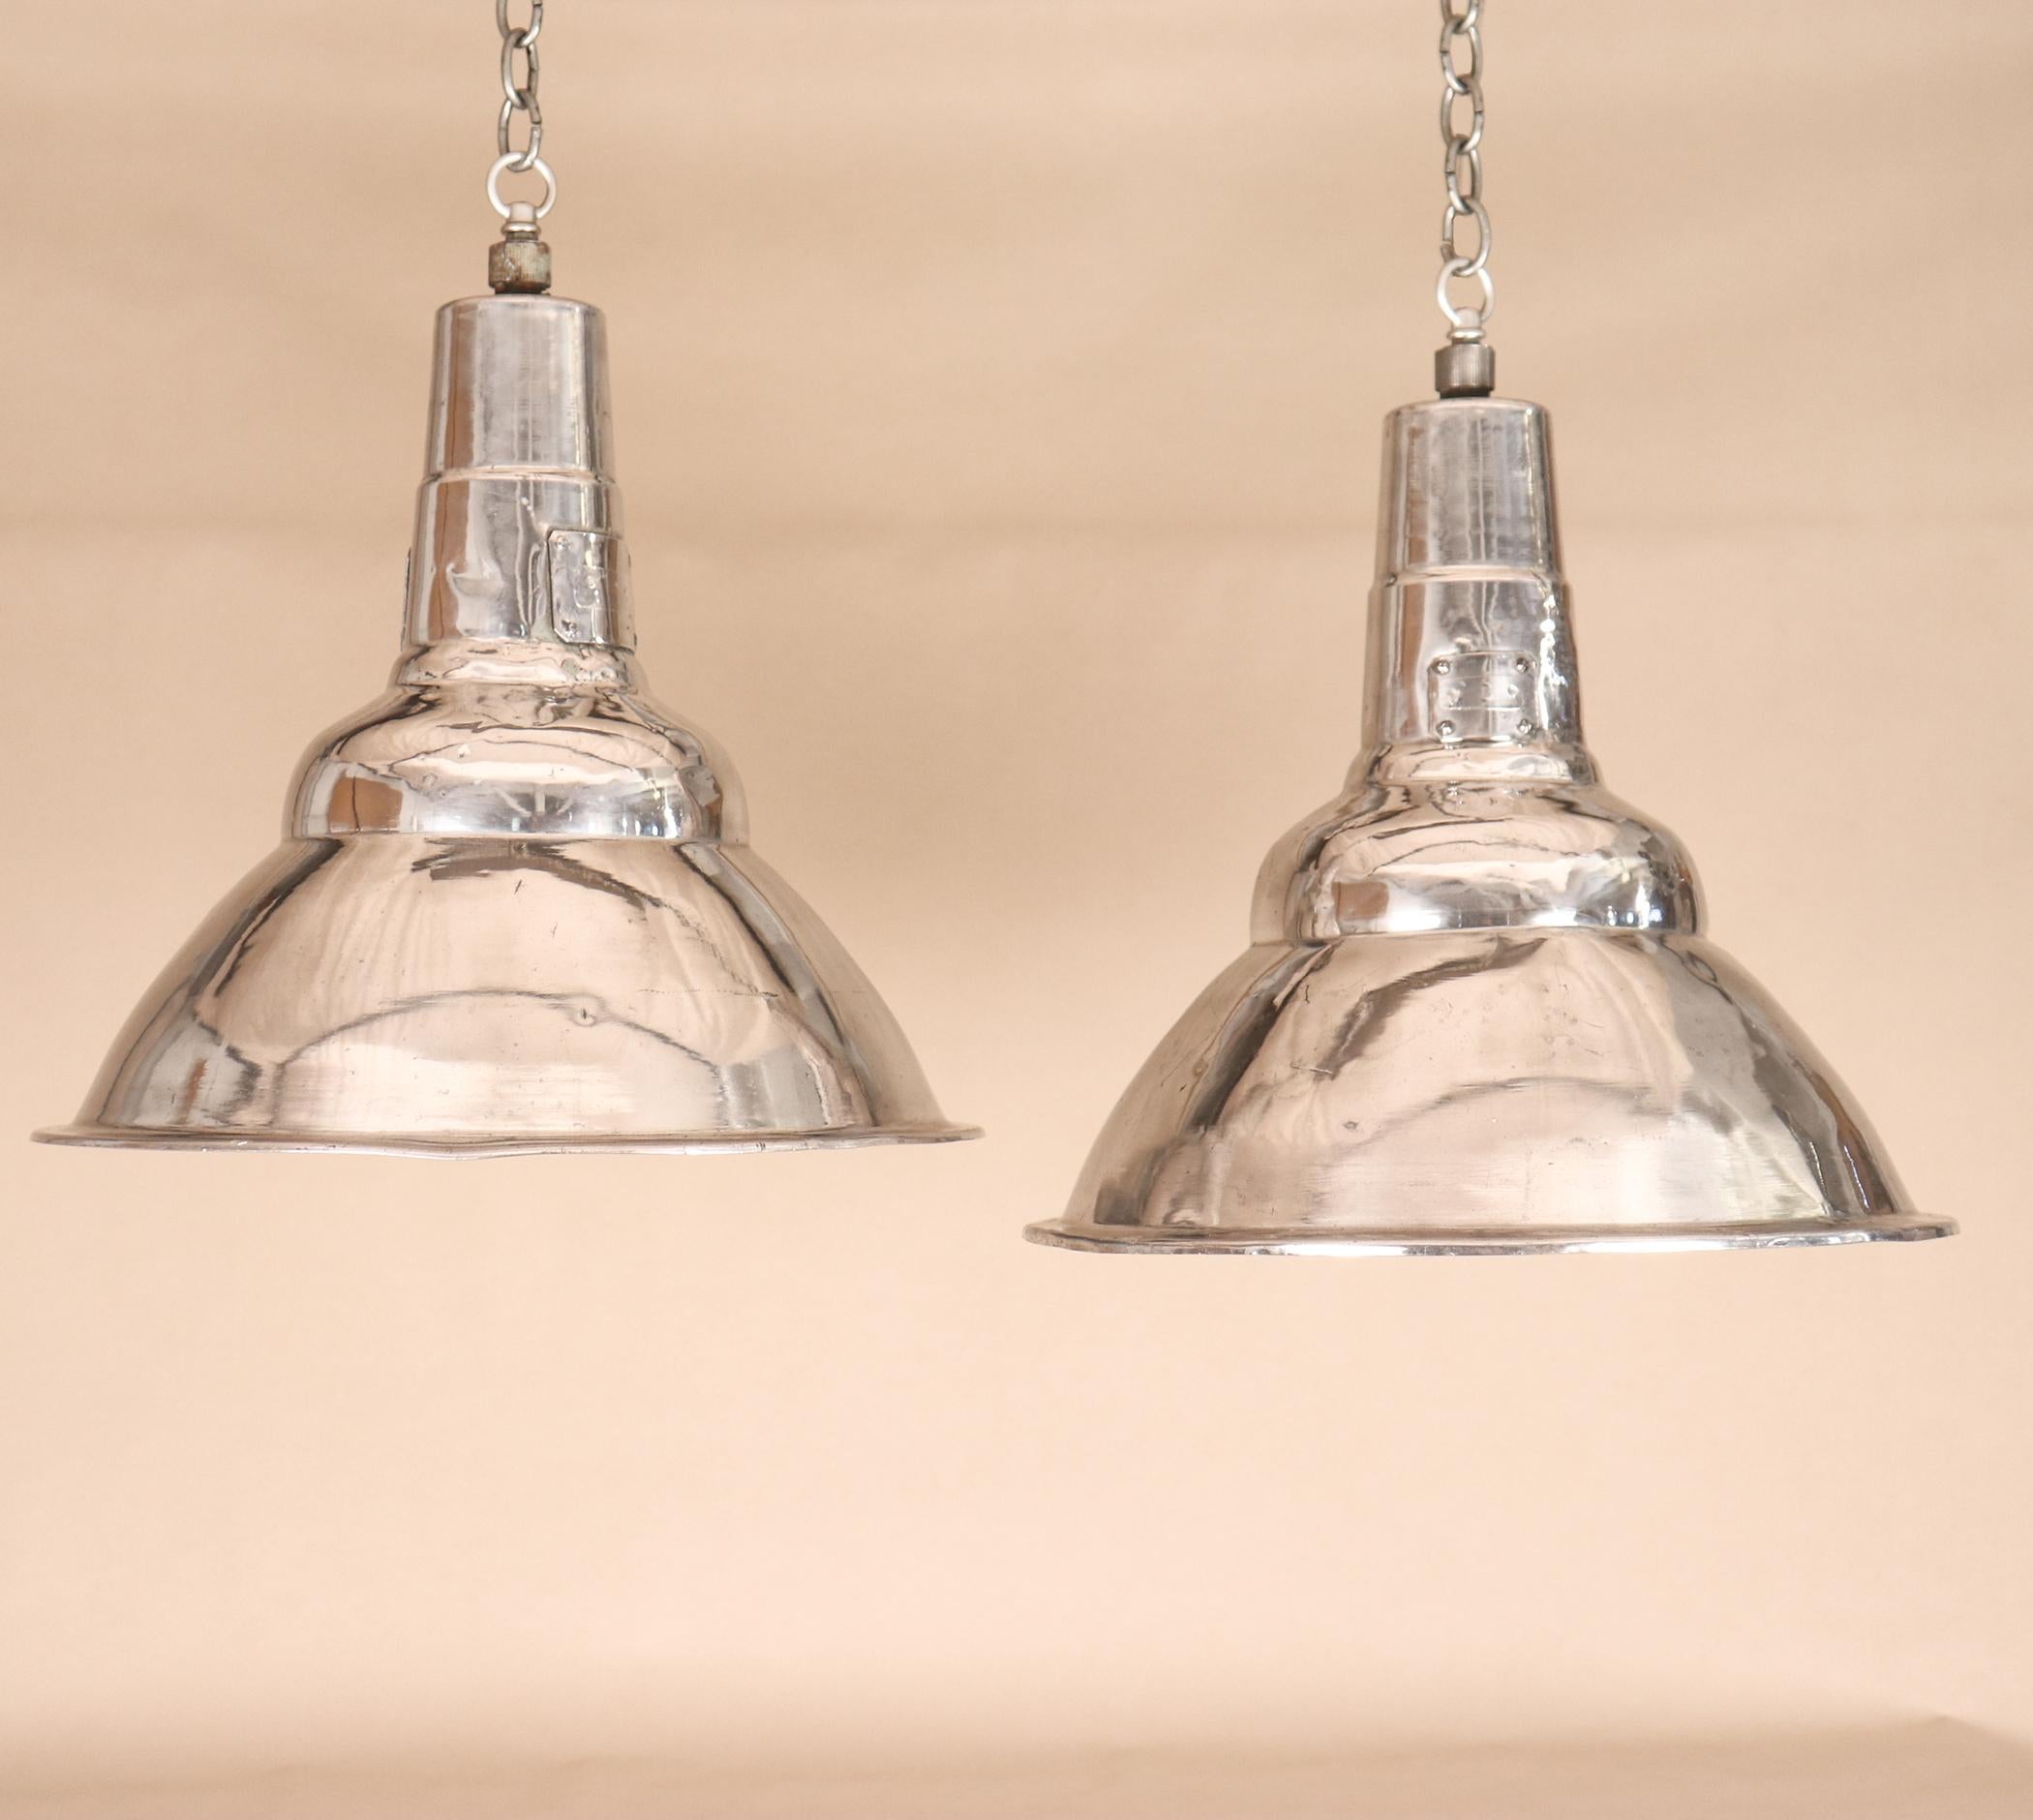 A pair of clean, simple polished aluminum Industrial pendant lights, circa 1960. These vintage floodlights have been newly re-wired with porcelain sockets and disseminate a wide beam, making them ideal over a kitchen island, a game table, or in a